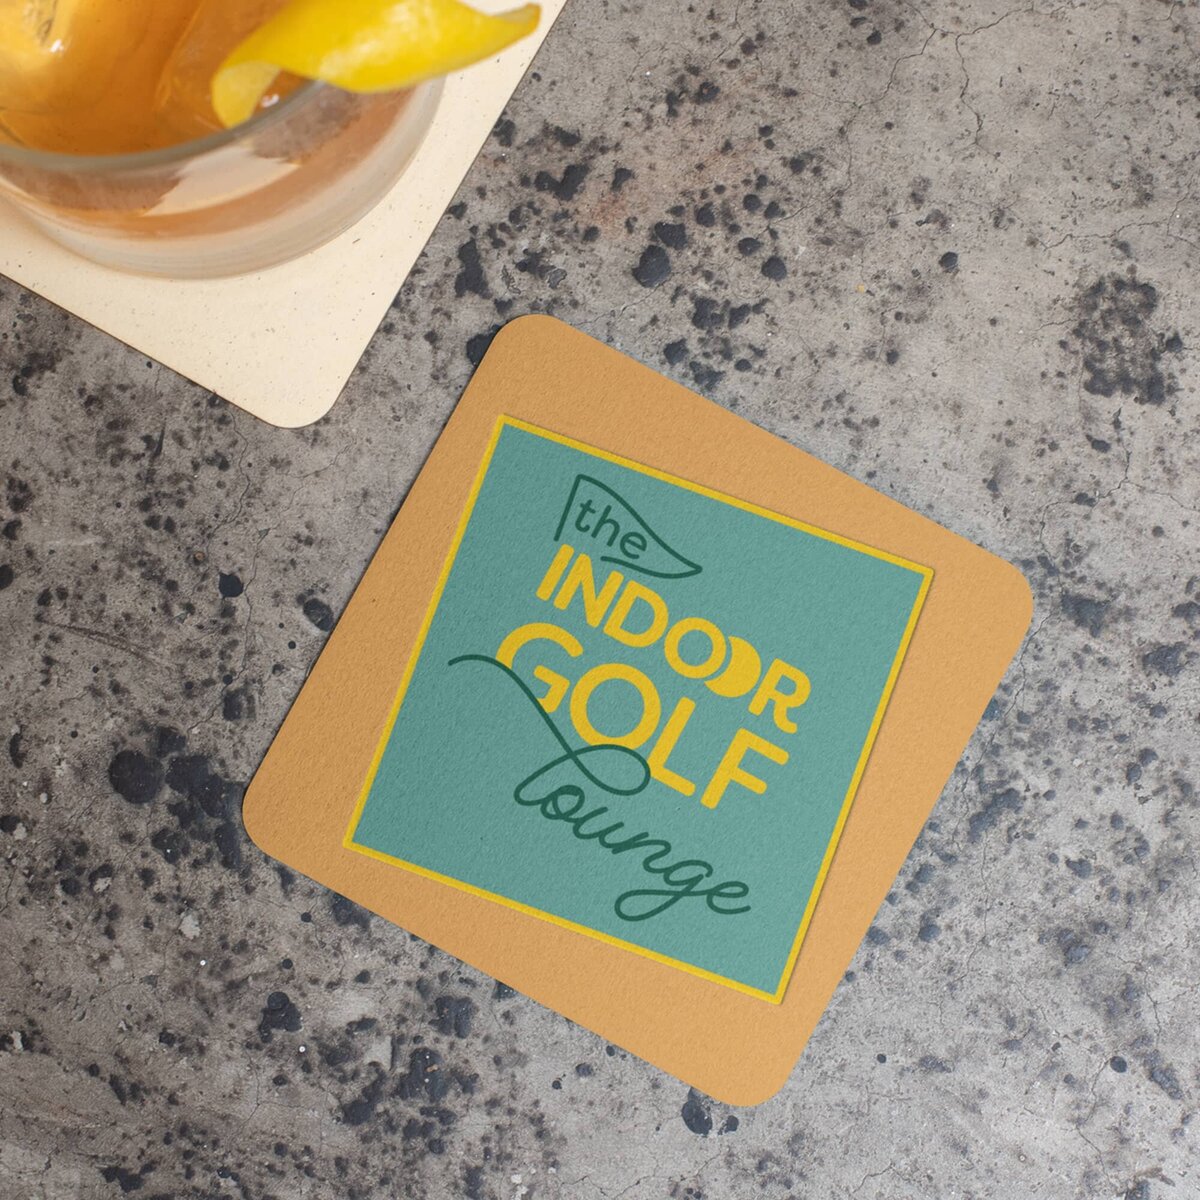 An square coster with rounded edges, printed in orange with The Indoor Golf Lounge logo in the middle